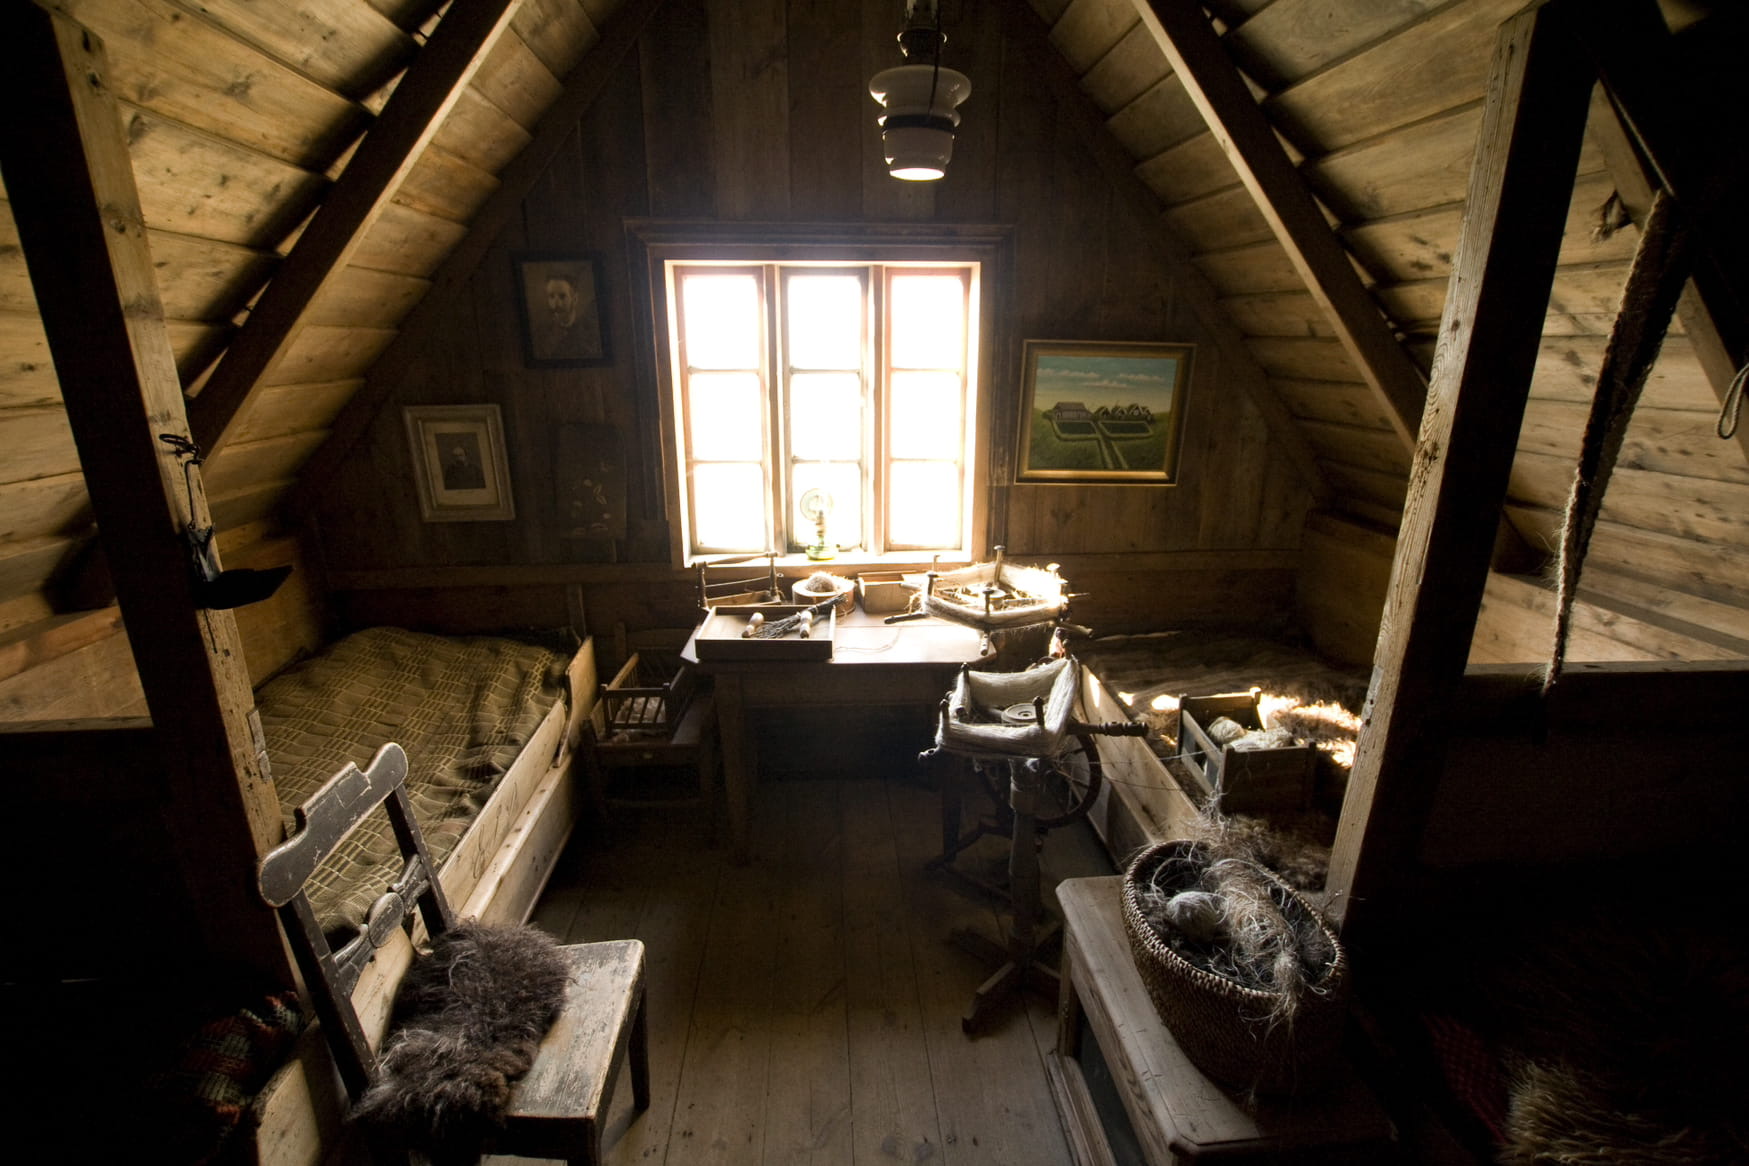 How To Keep An Attic Warm In Winter